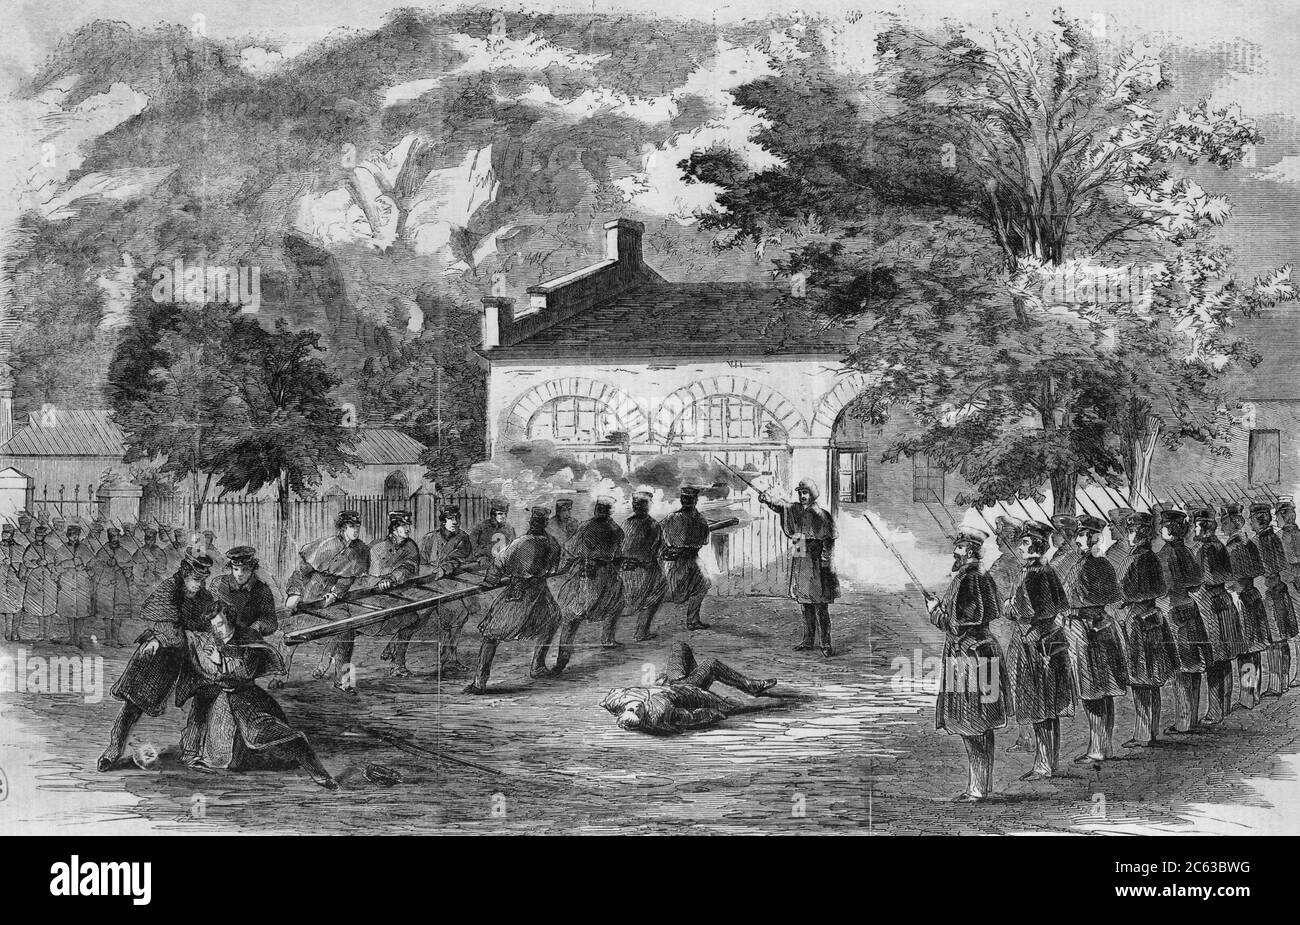 The Harper's Ferry insurrection -The U.S. Marines storming the engine house - Insurgents firing through holes in the doors. 1859 Stock Photo